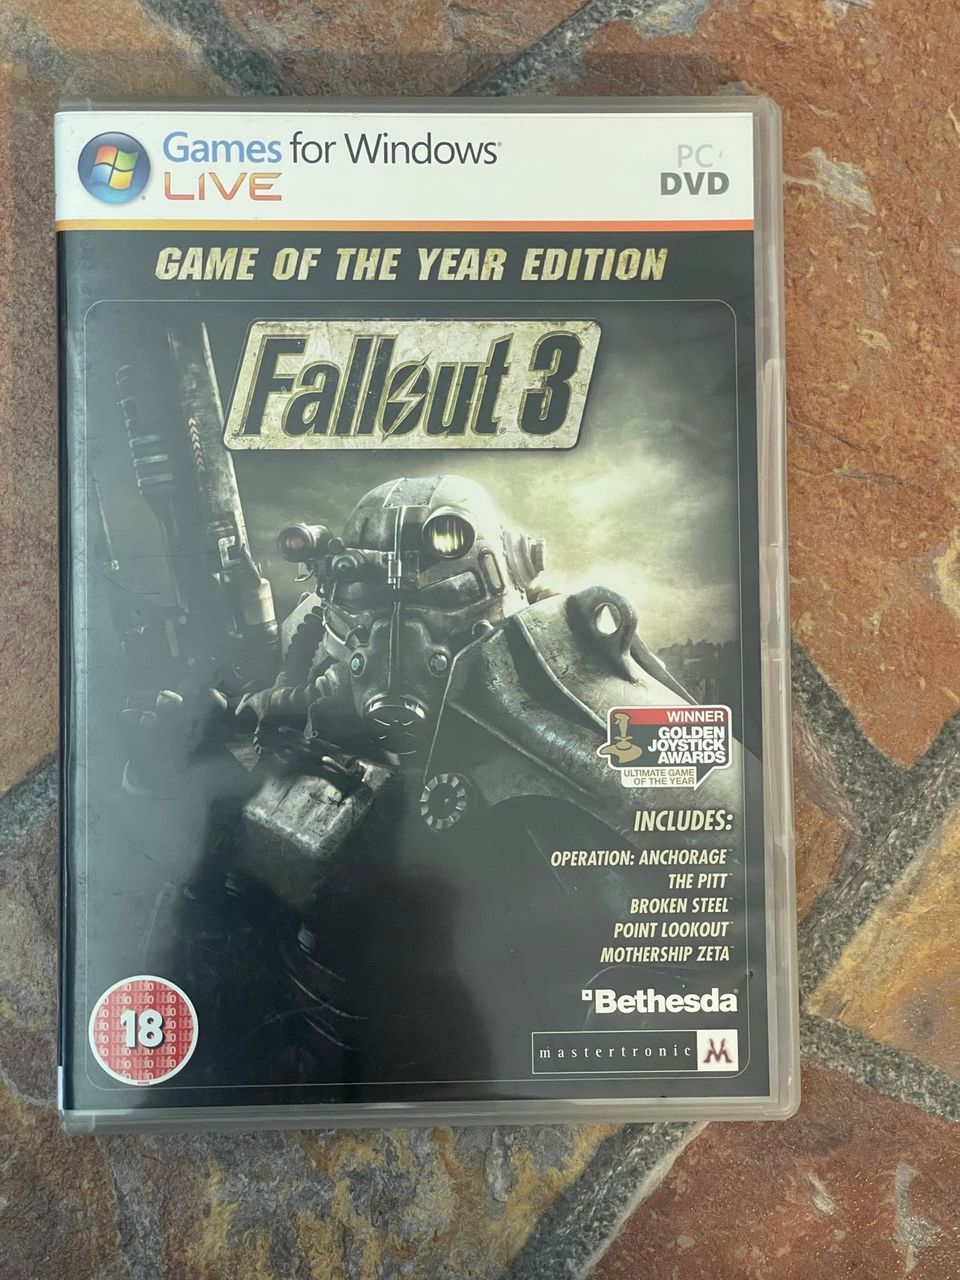 Fallout 3, game of the year edition